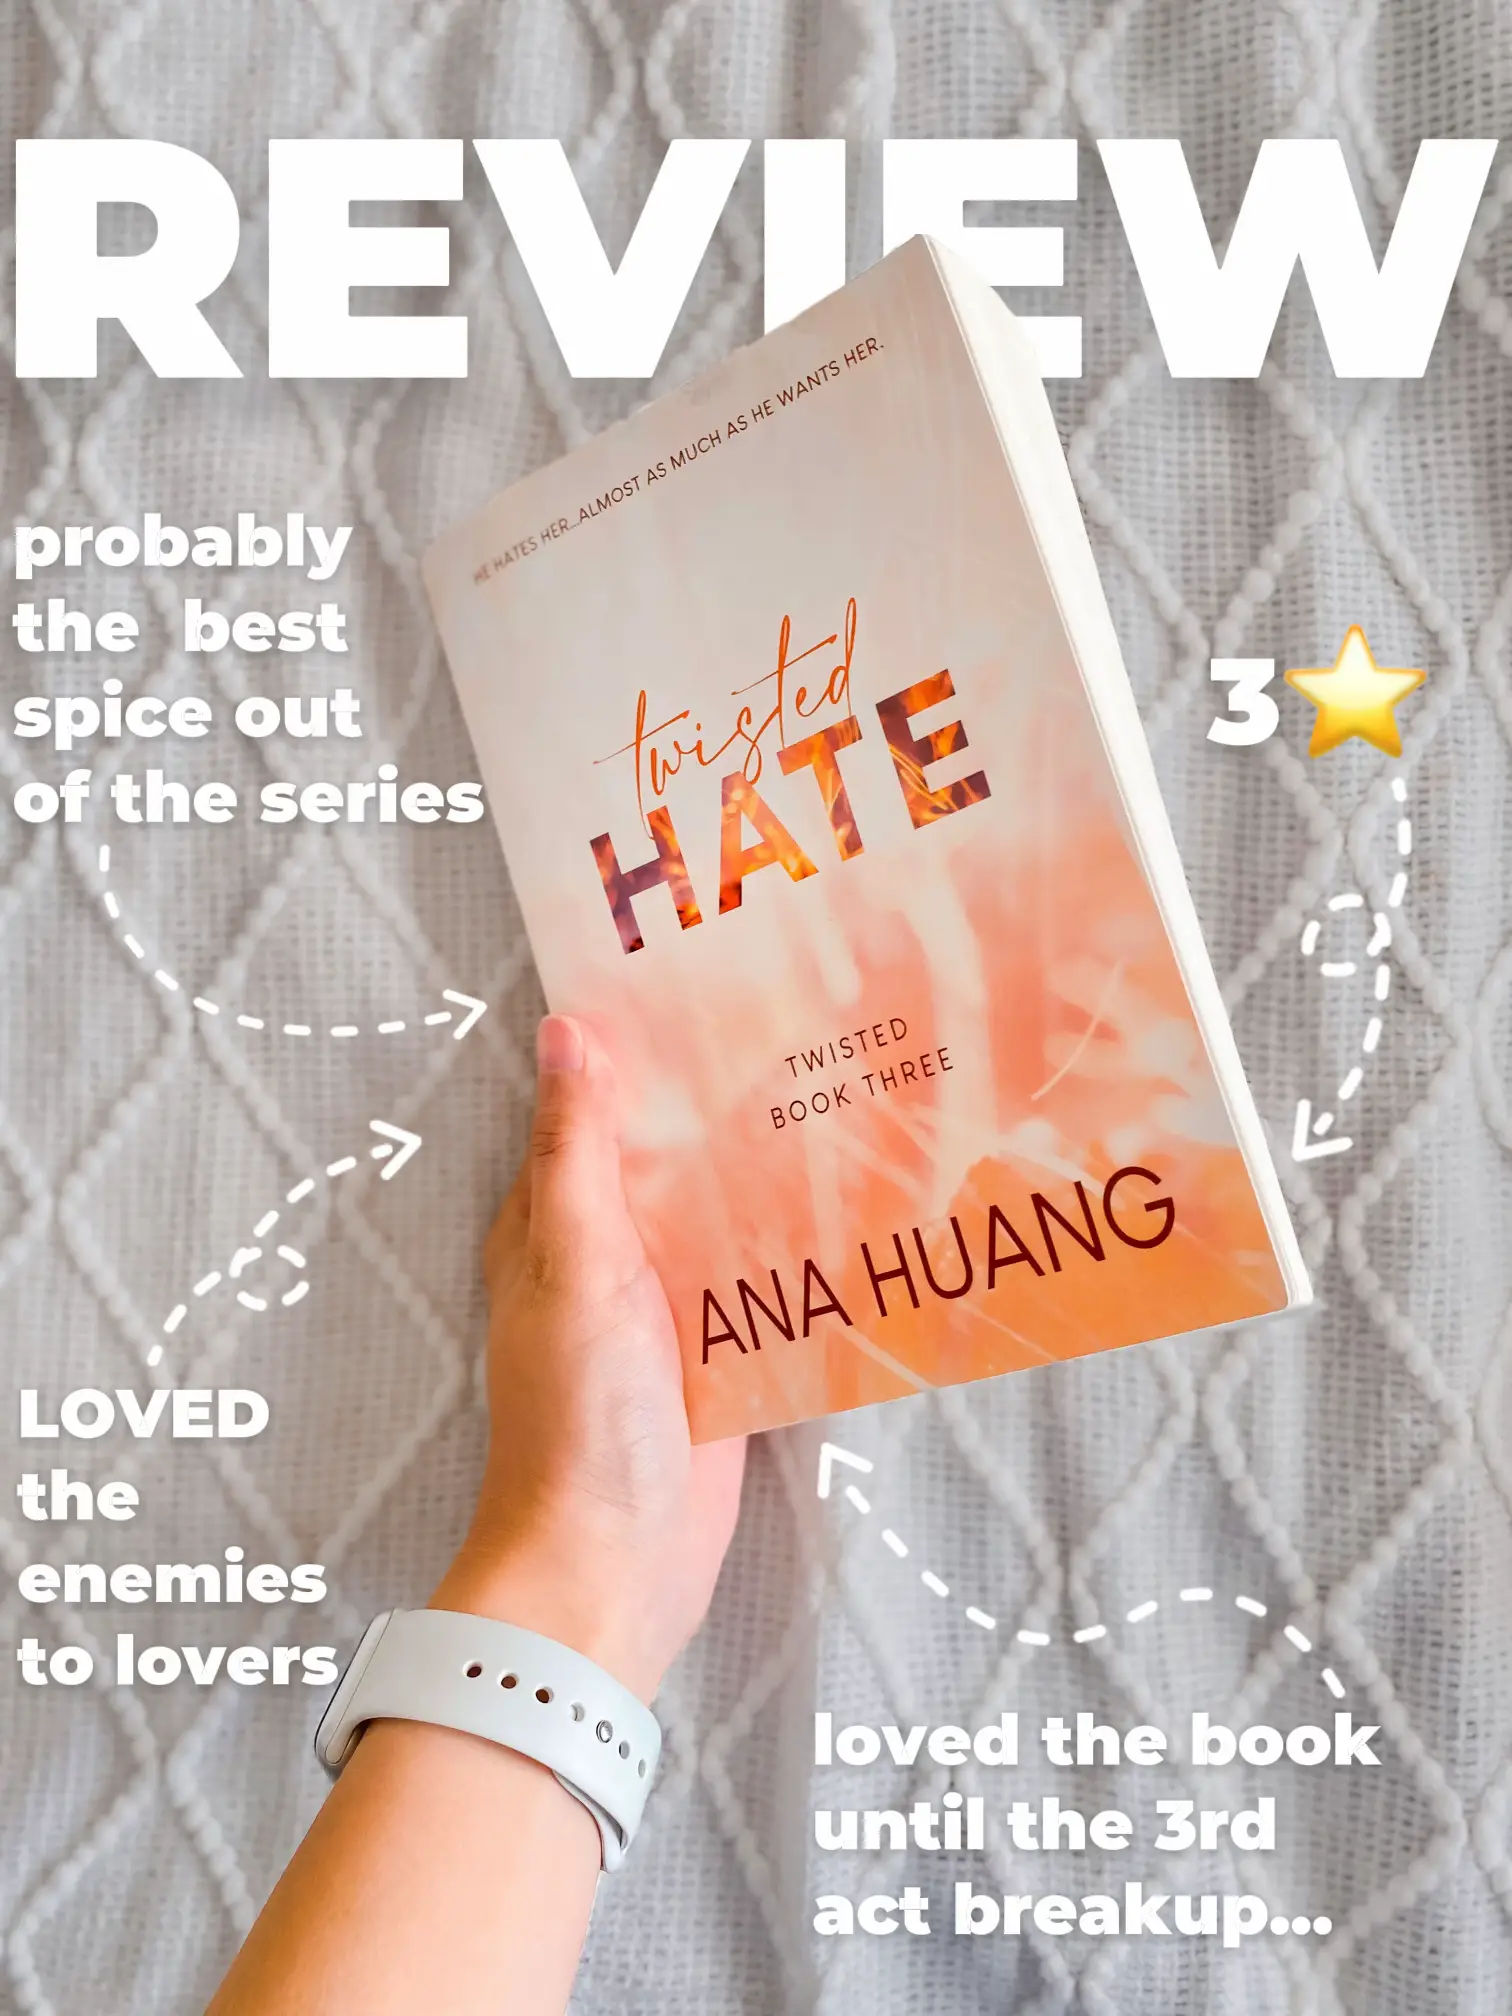 Twisted Hate by Ana Huang: FAQs + Books Like It